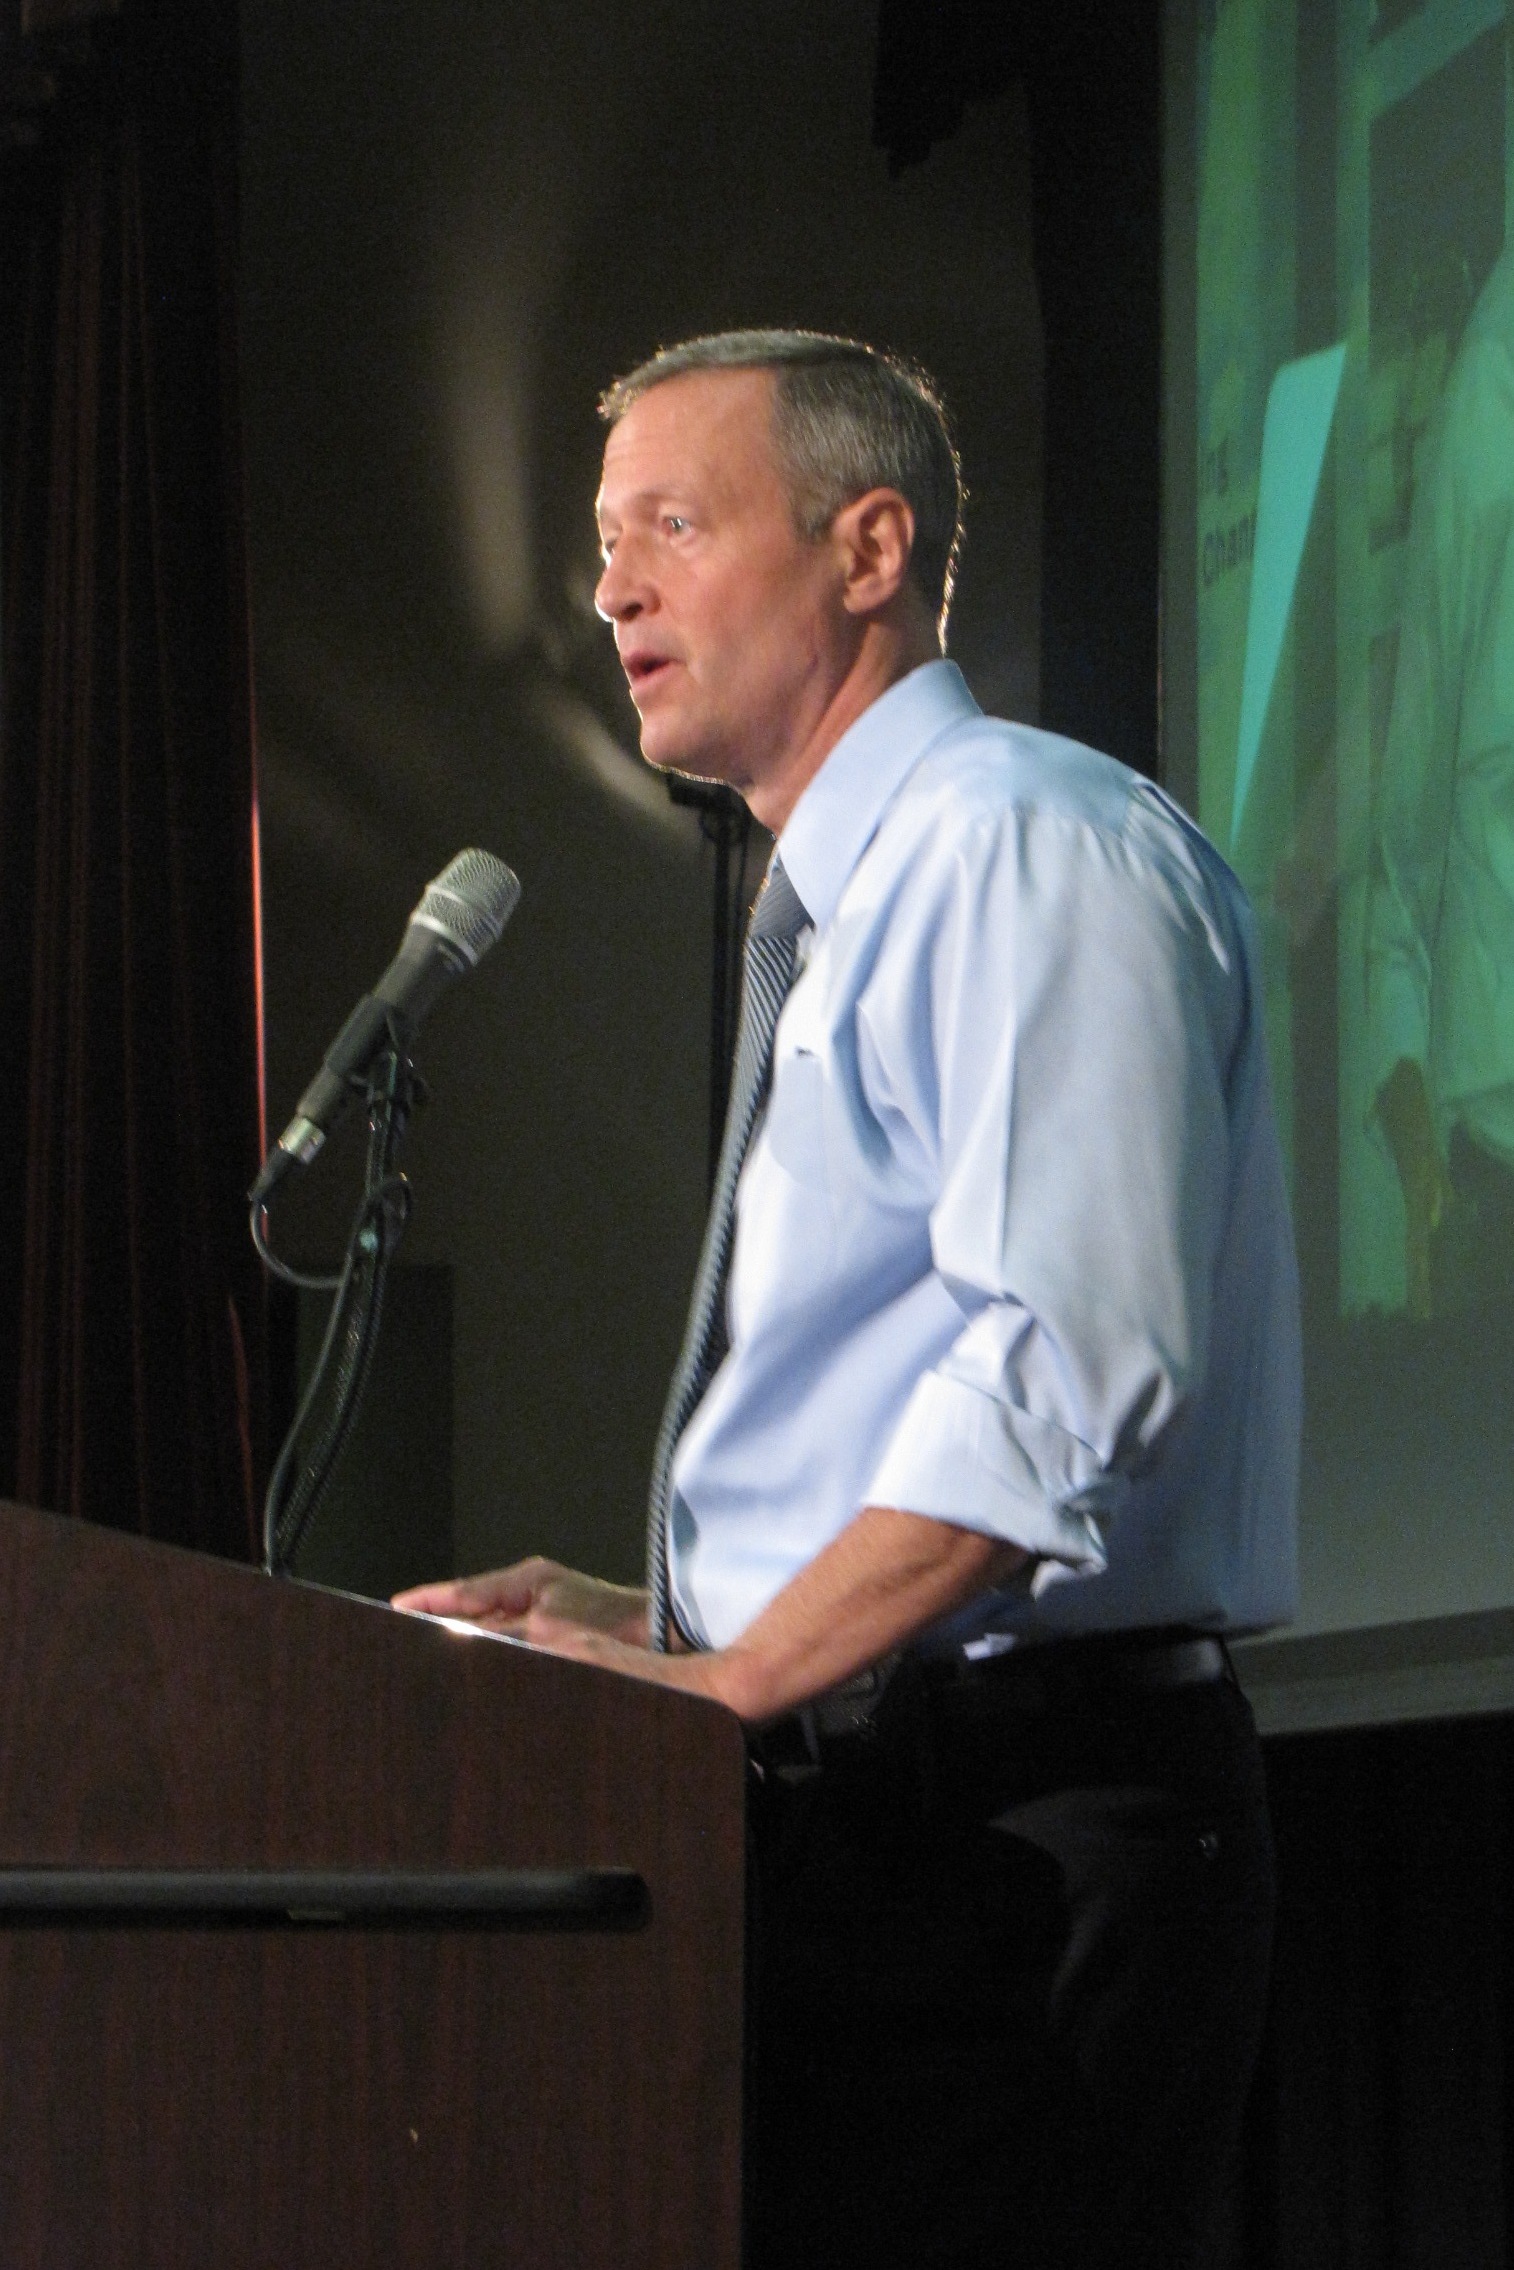 Governor Martin O'Malley at Maryland Climate Change Summit